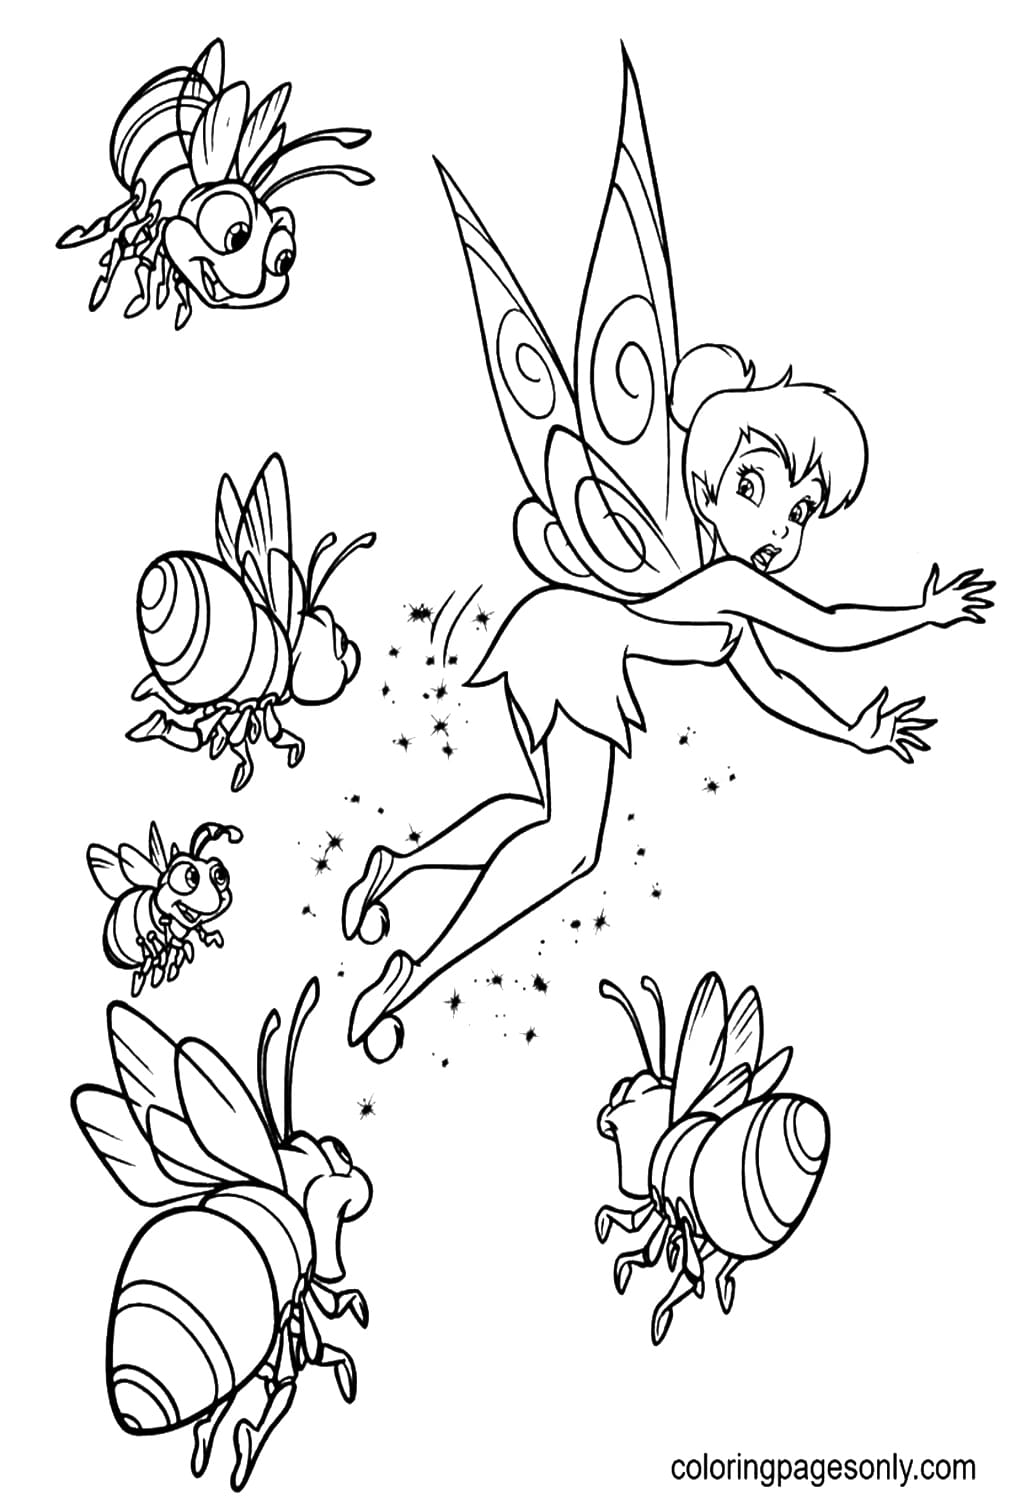 TinkerBell with Fireflies from Tinkerbell